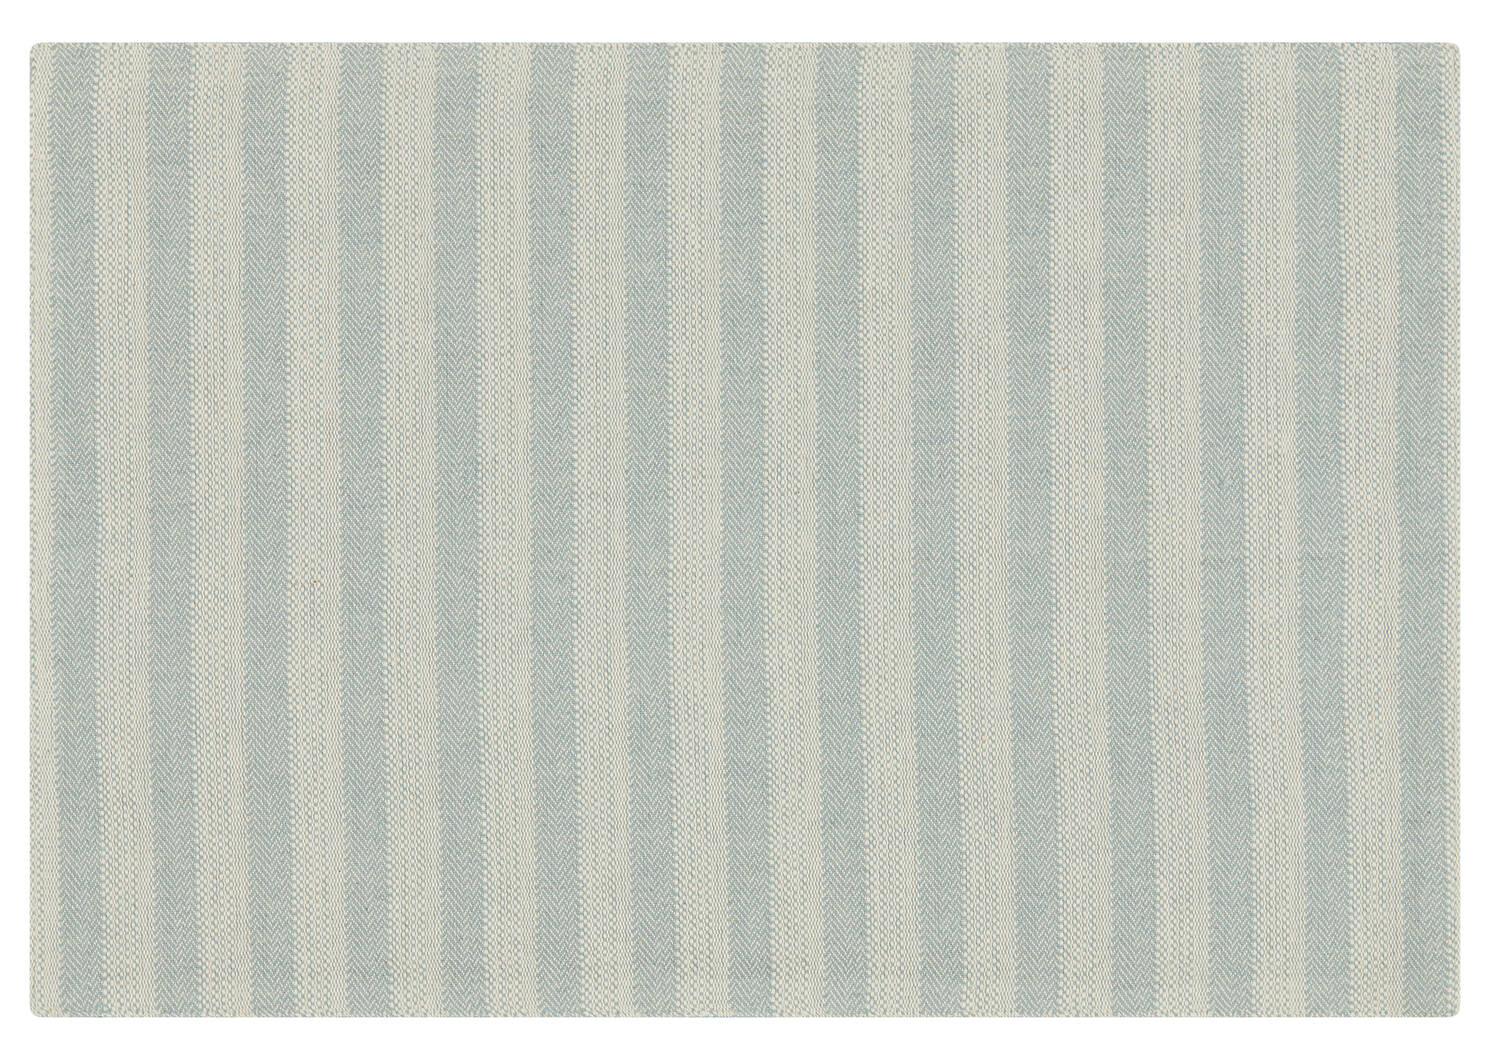 Rodham Striped/Chambray Placemat